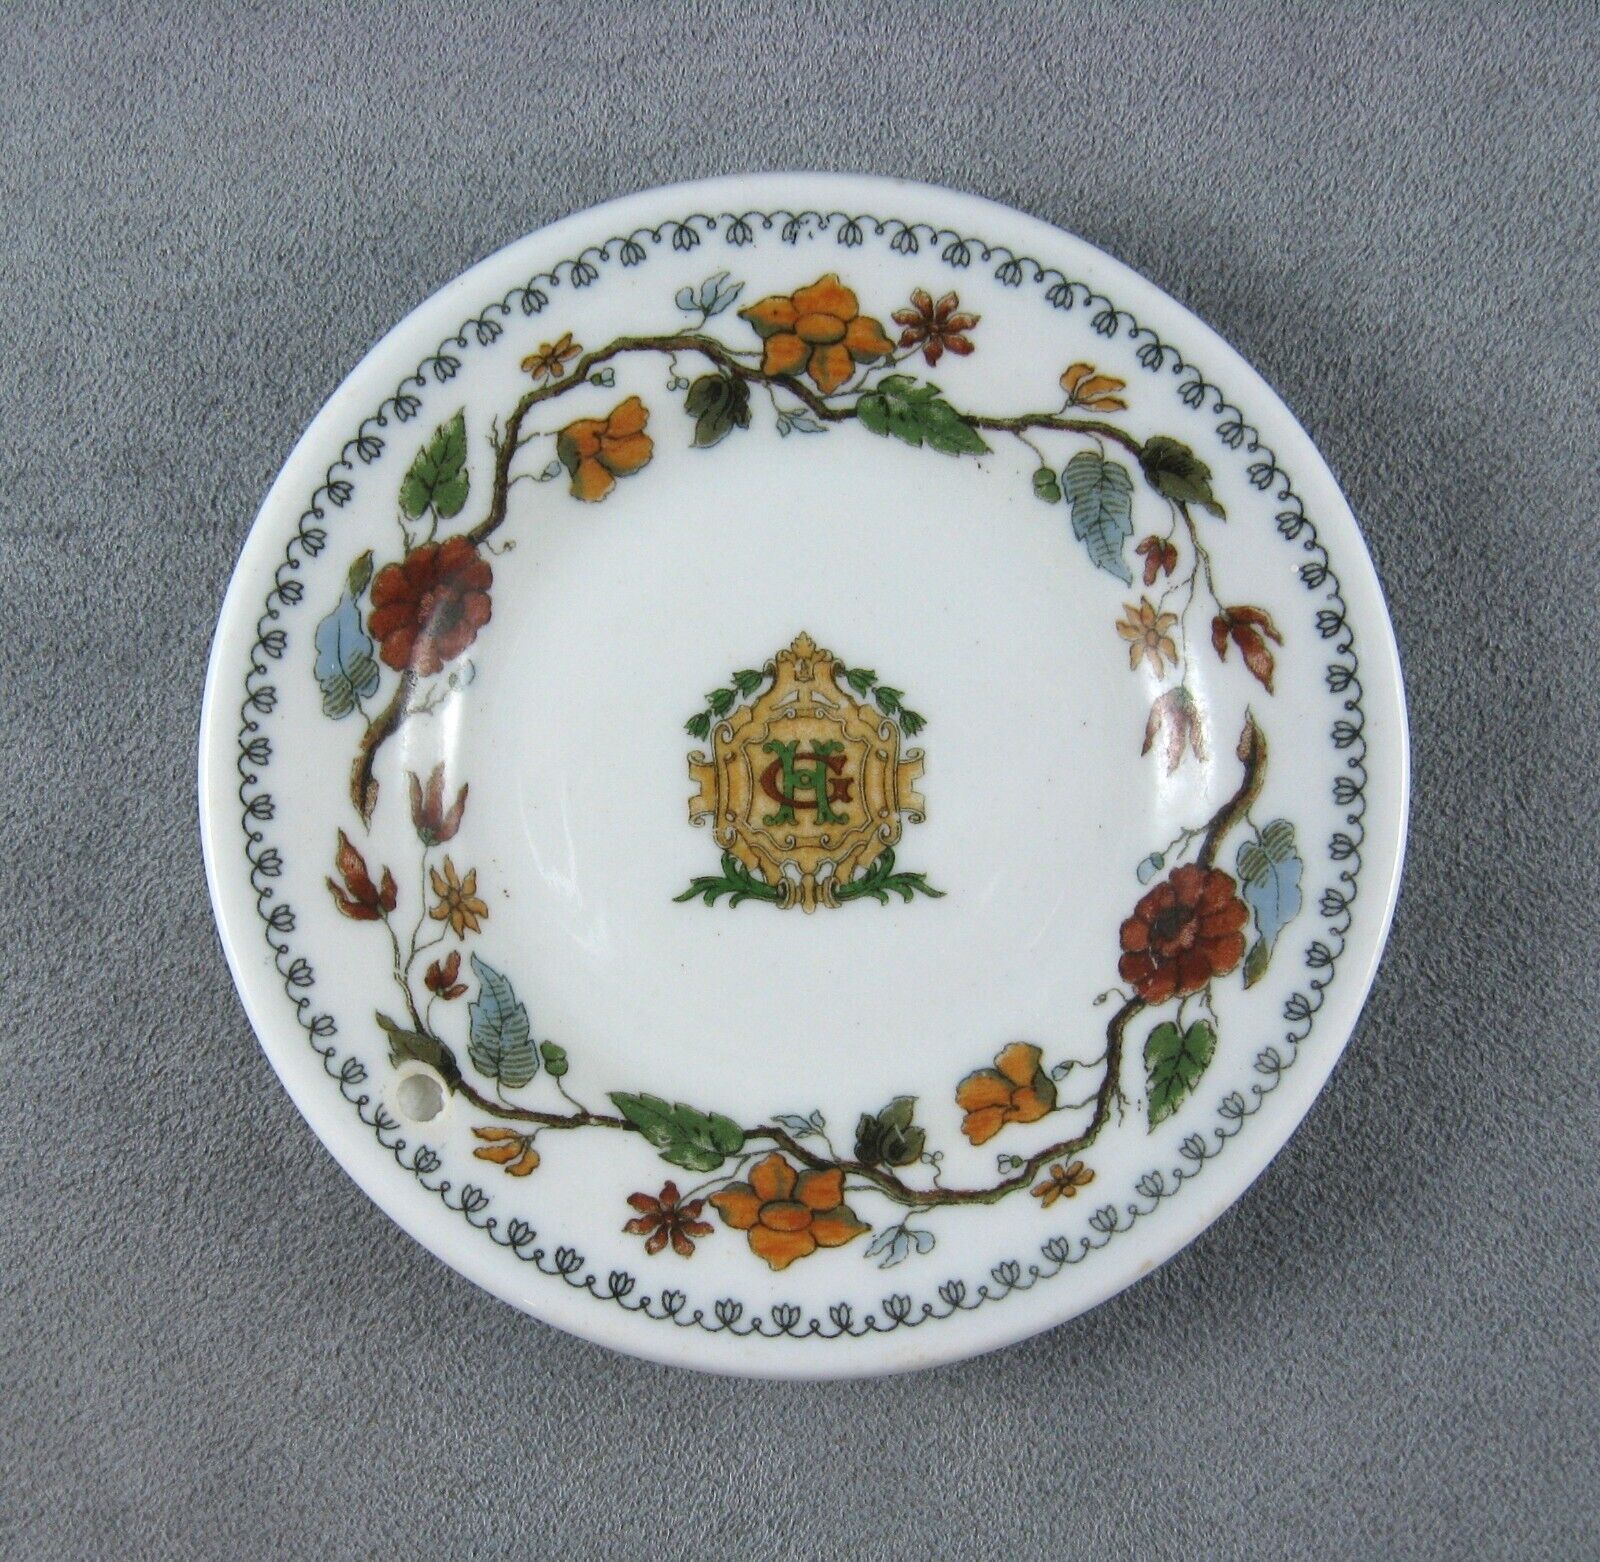 1924 O.P. Co. Syracuse China BUTTER PAT The Greenbrier Hotel Sulphur Springs WV